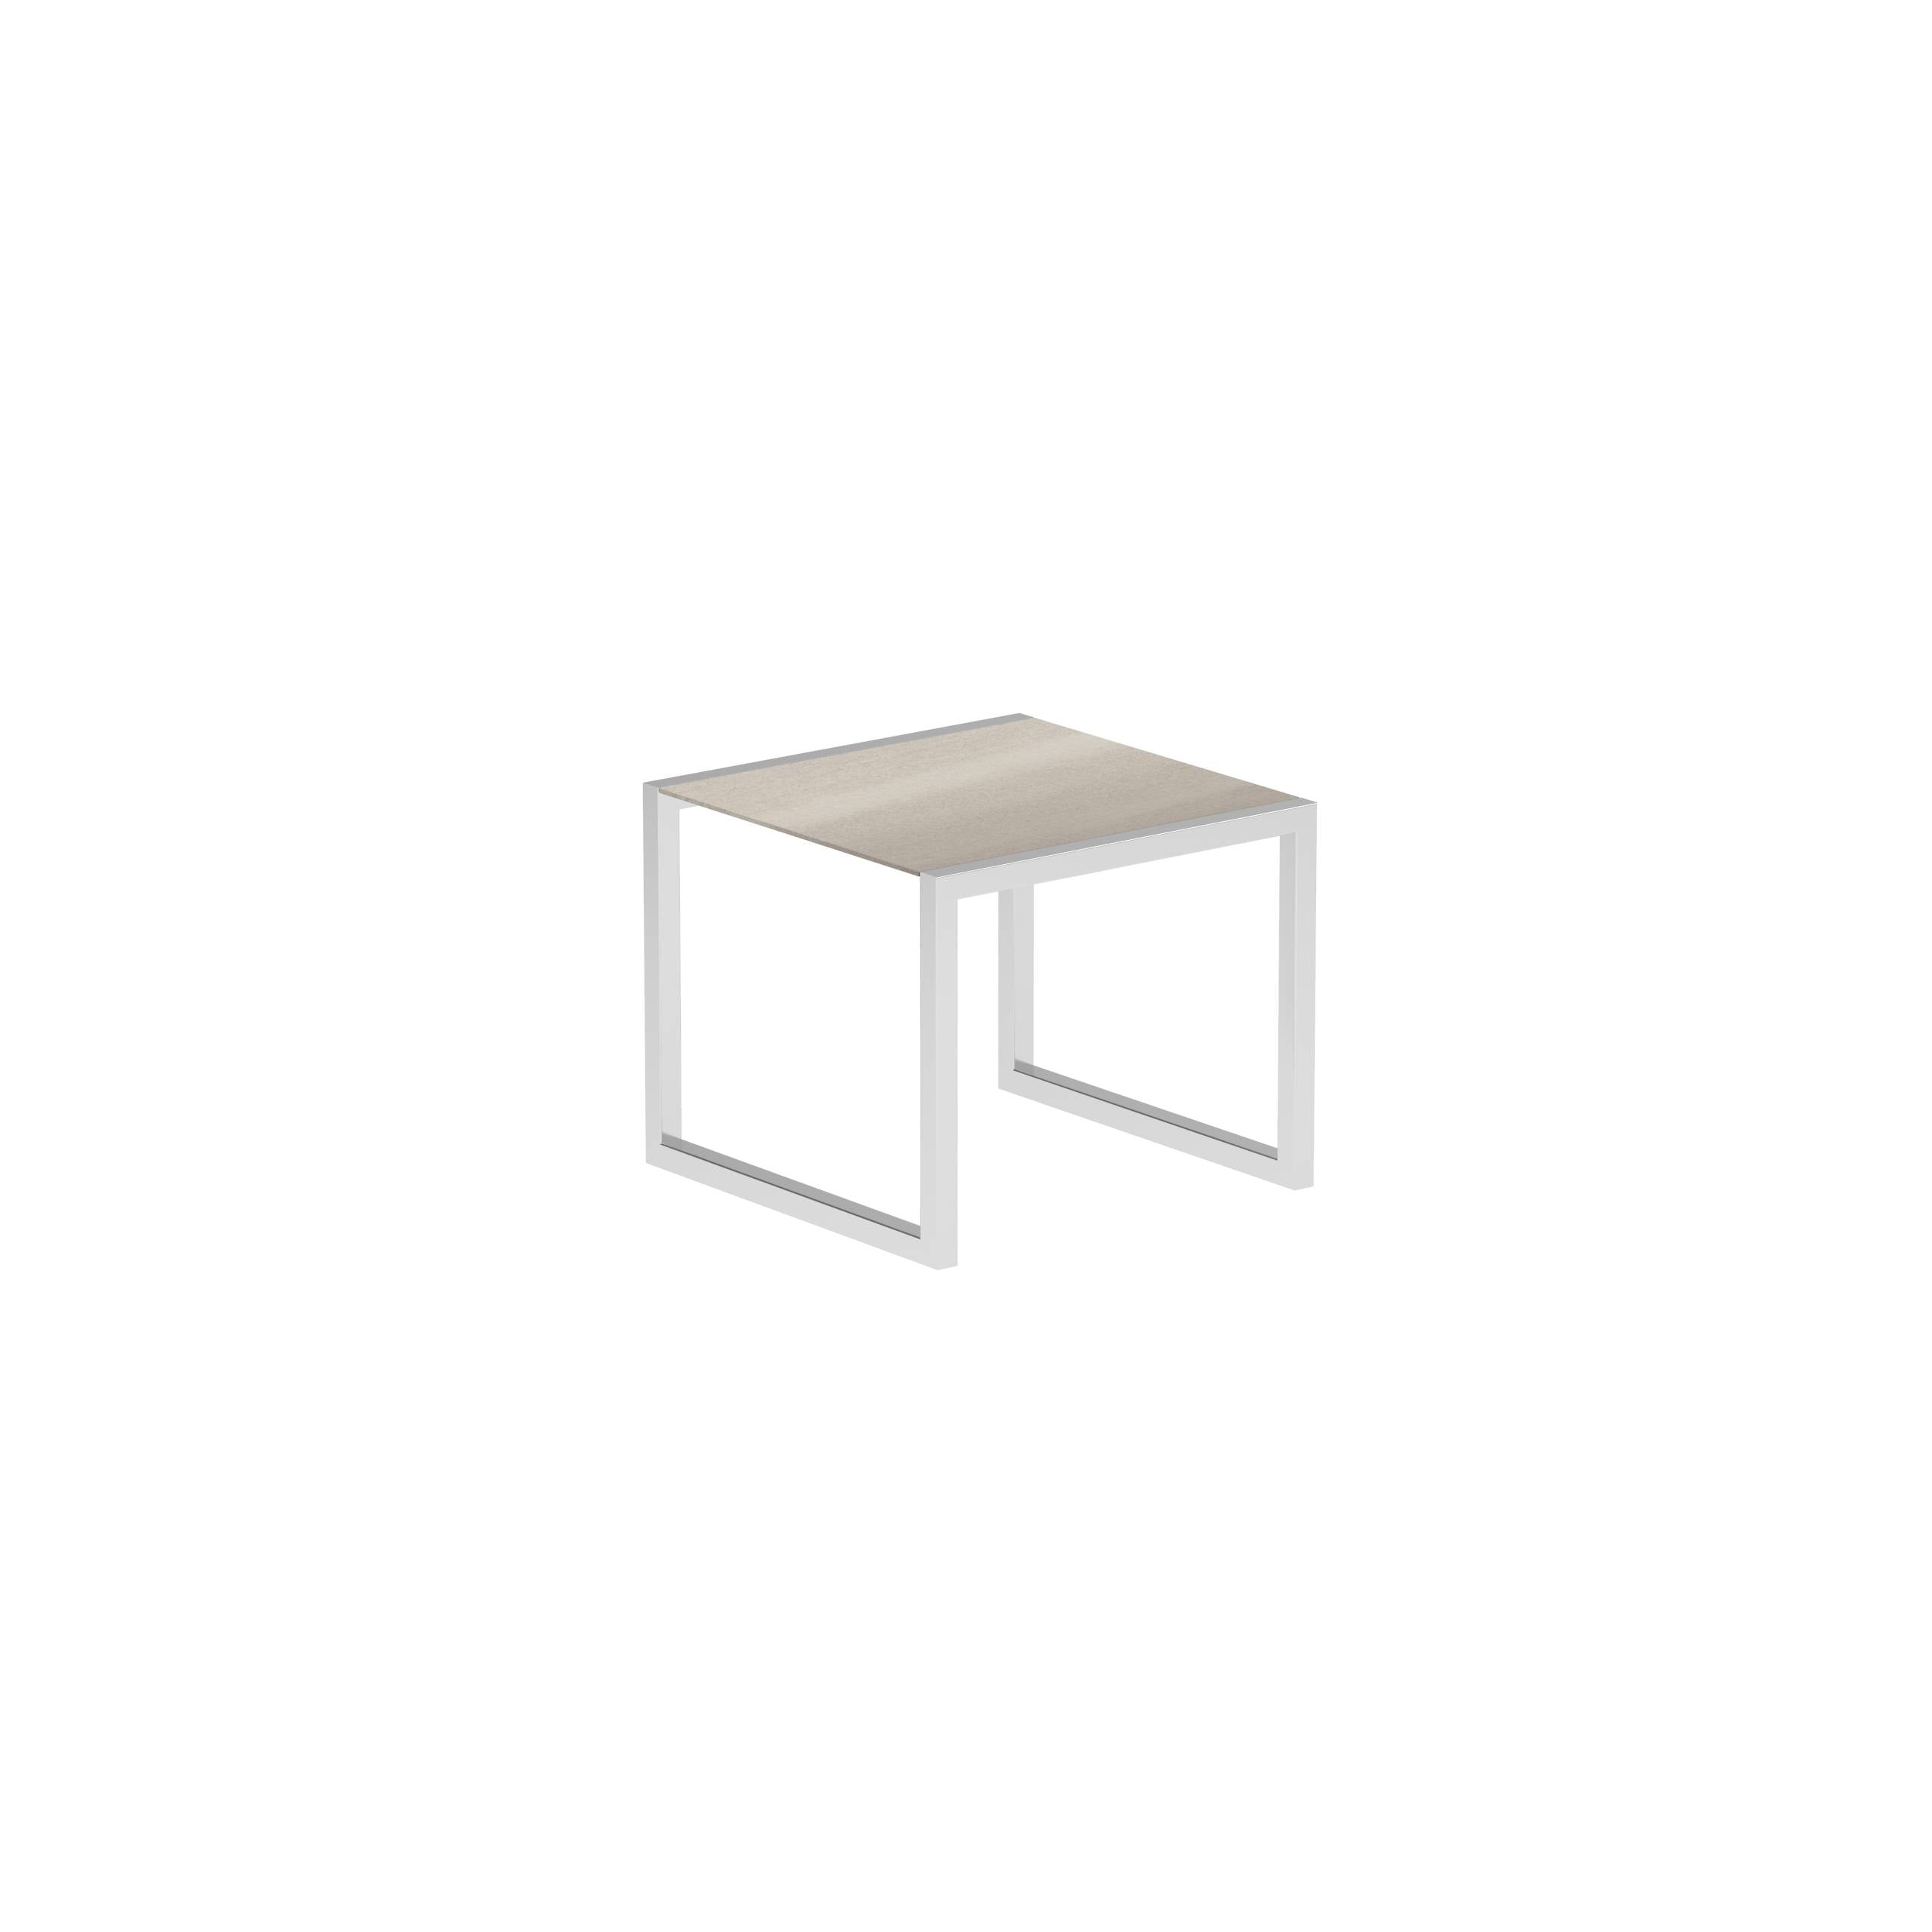 Ninix Table 90x90cm With Stainless Steel And Ceramic Taupe Grey El.Pol